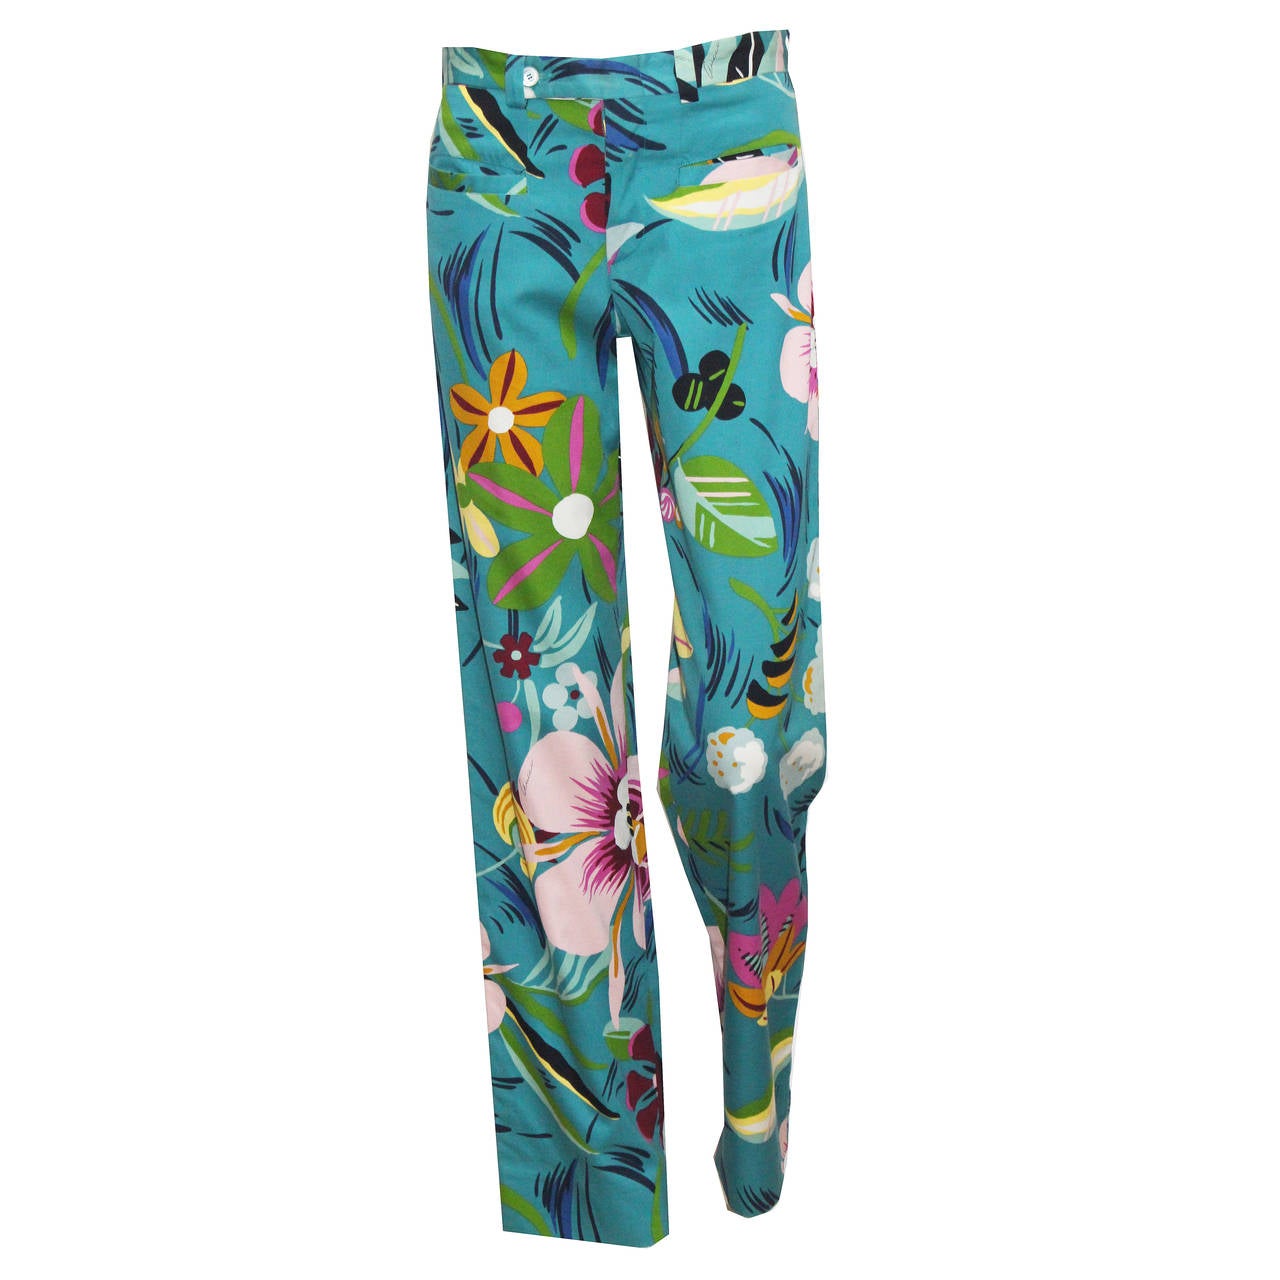 Iconic Tom Ford for Gucci Floral Pants c. 1999 at 1stDibs | tom ford ...